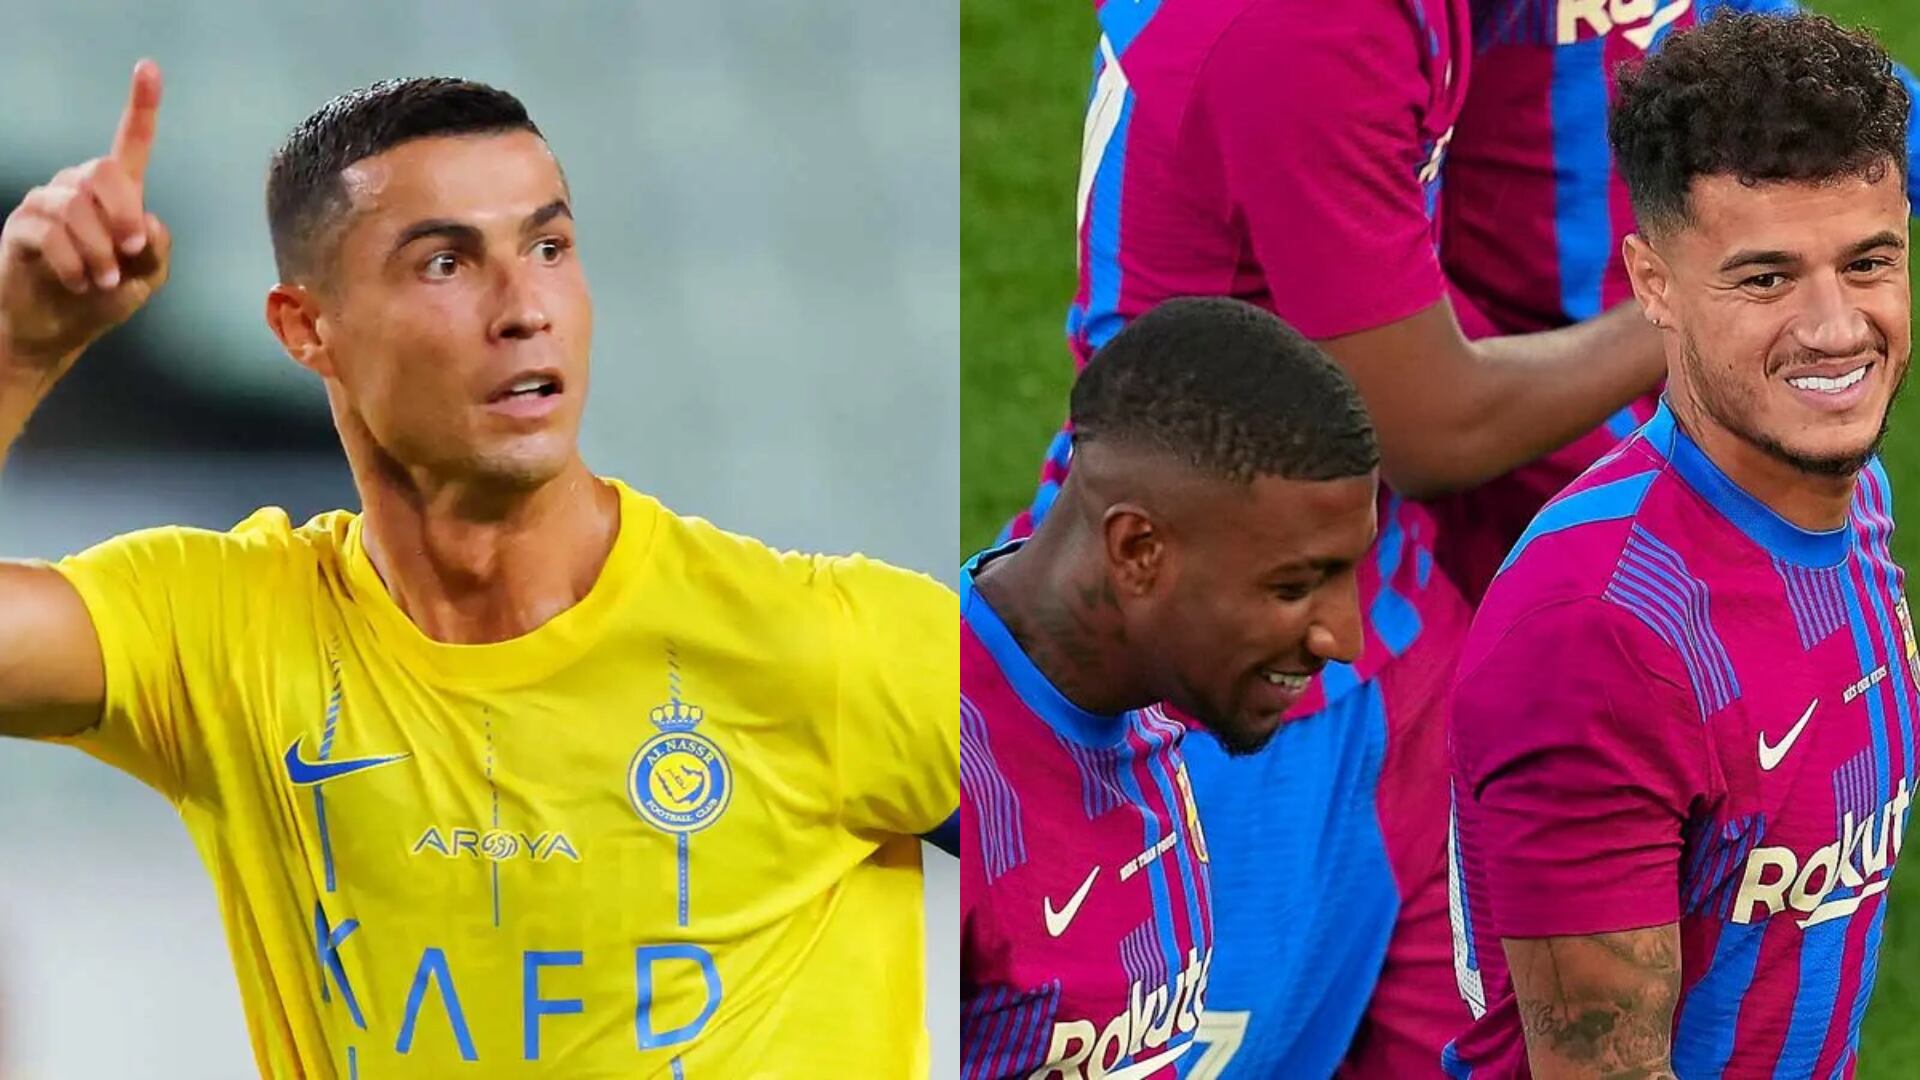 He played at Barcelona, and now Cristiano's Al Nassr is going after him